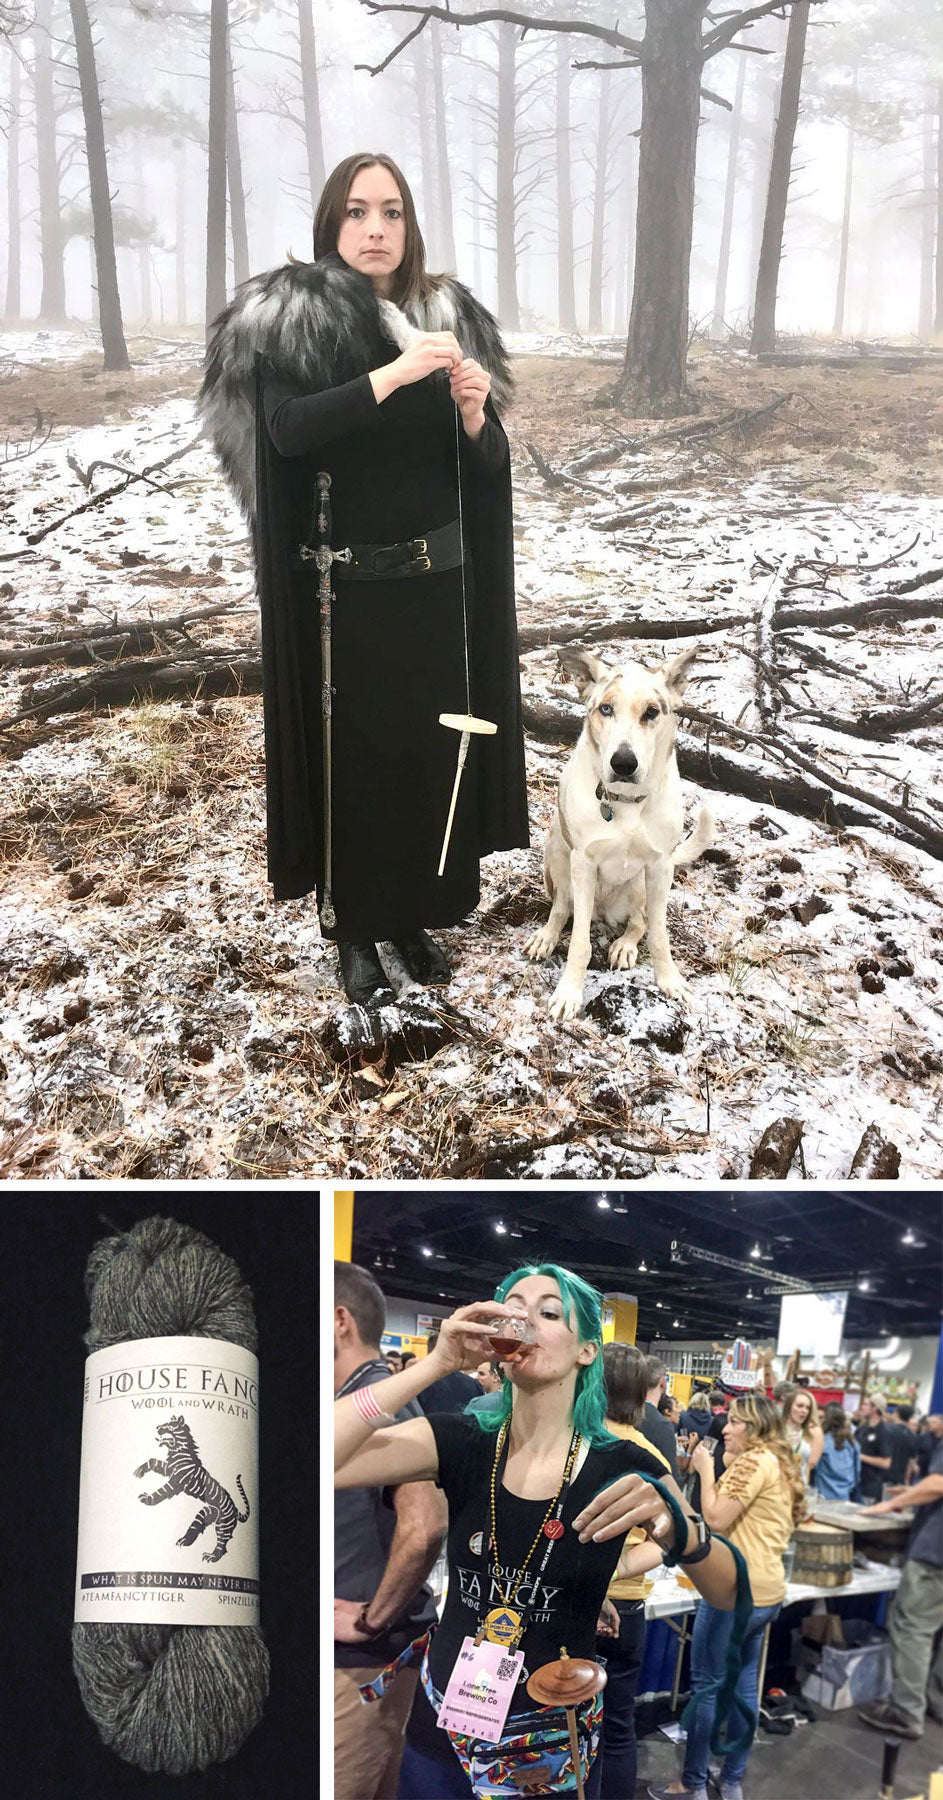 Collage of three images: Kim dressed in black cloak with furs and sword, spinning yarn in a snowy forest, A grey skein of yarn, Melanie spinning while drinking beer at Great American Beer Fest 